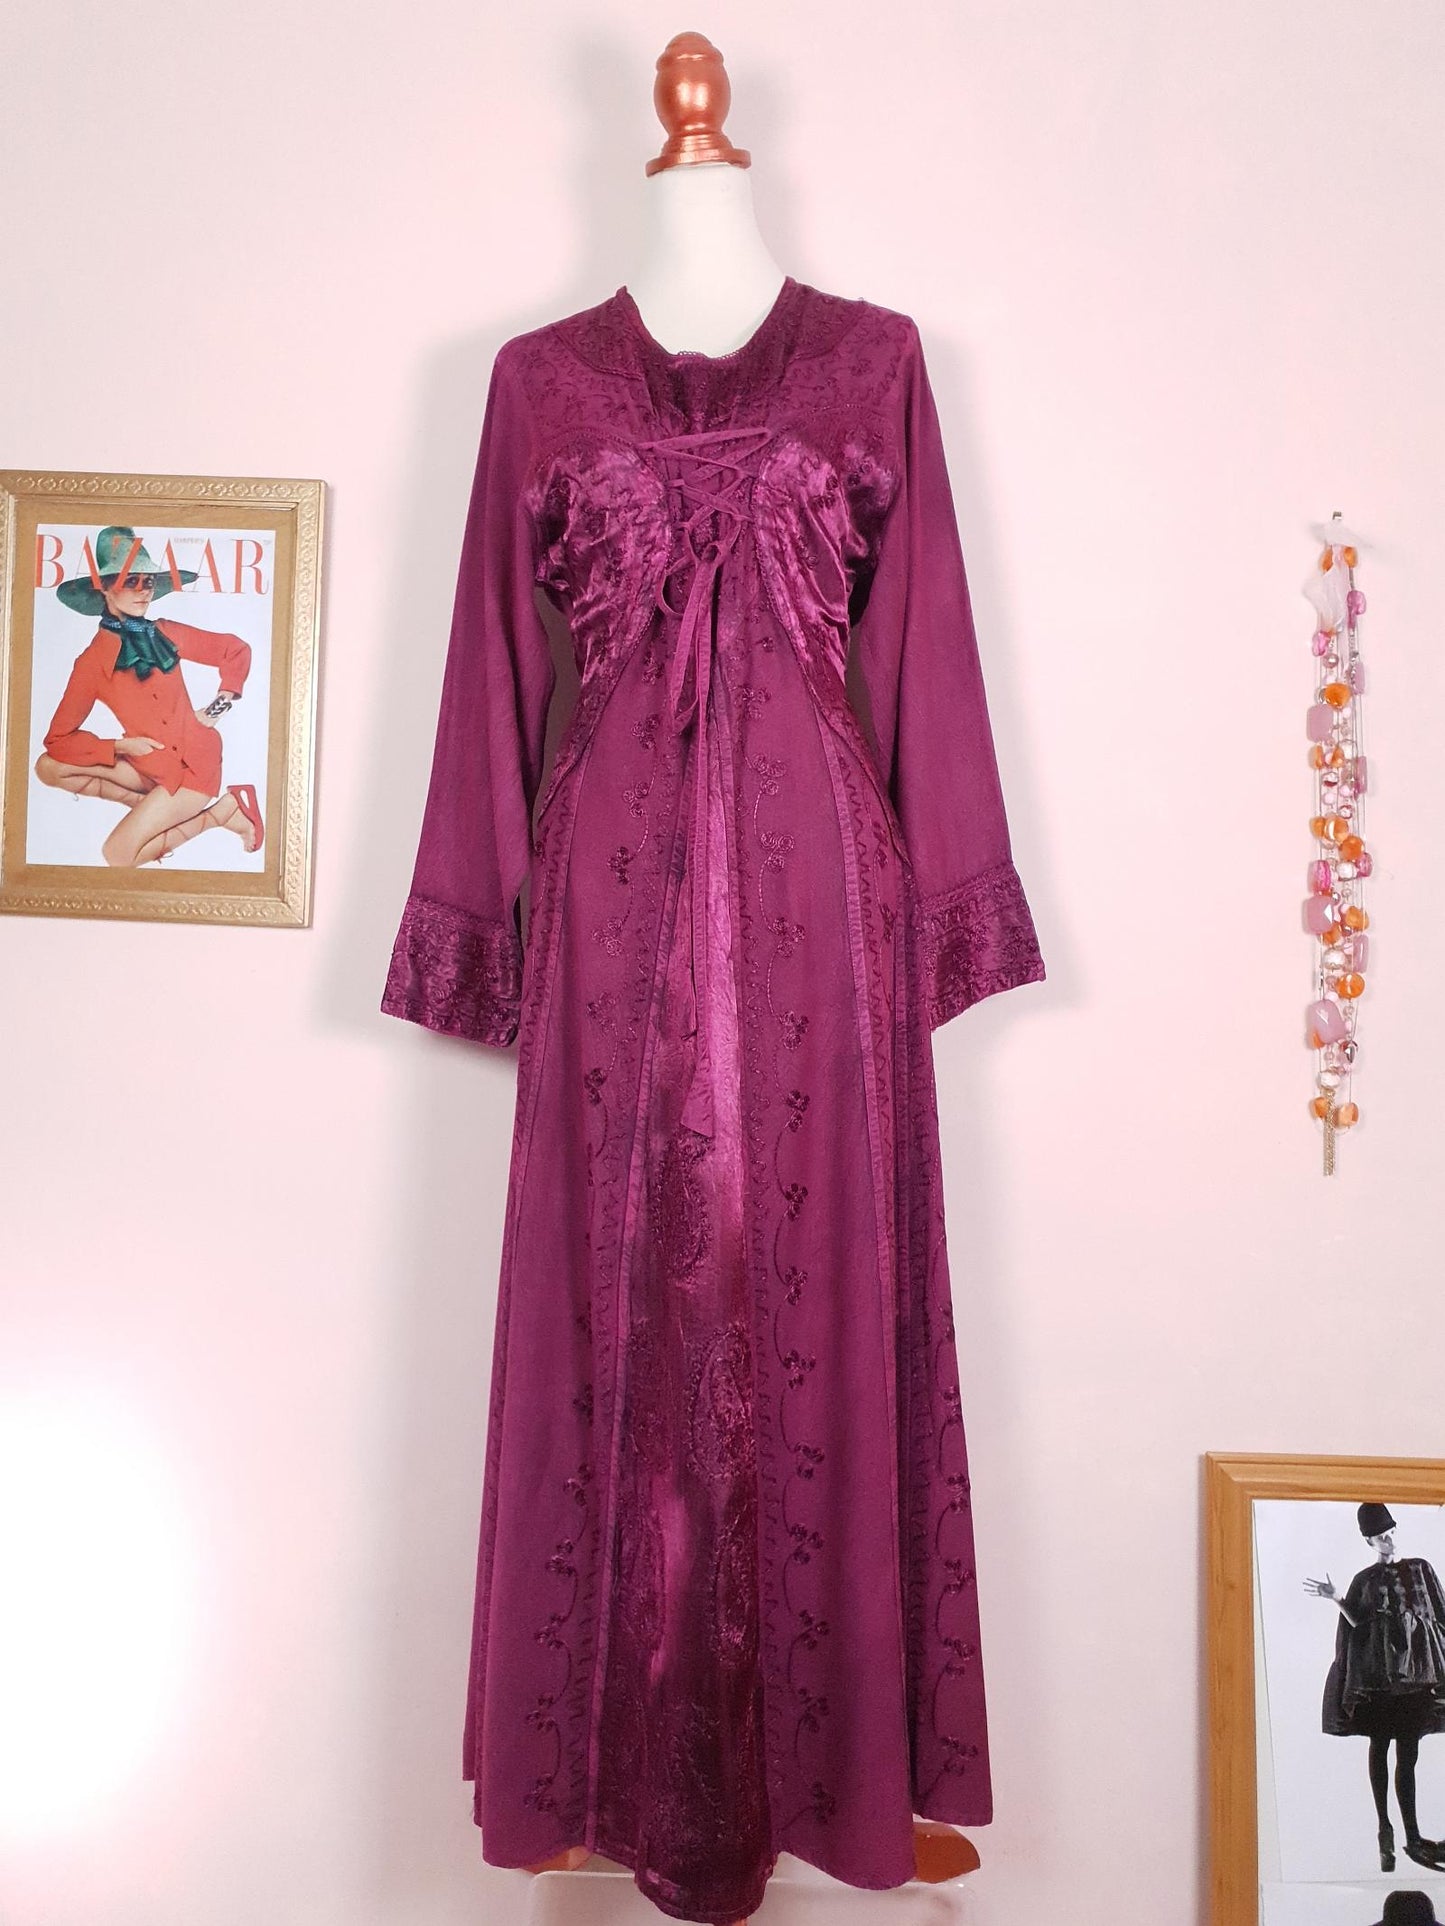 Maroon Boho Embroidered Maxi Dress - Pre-Owned Size 12/14